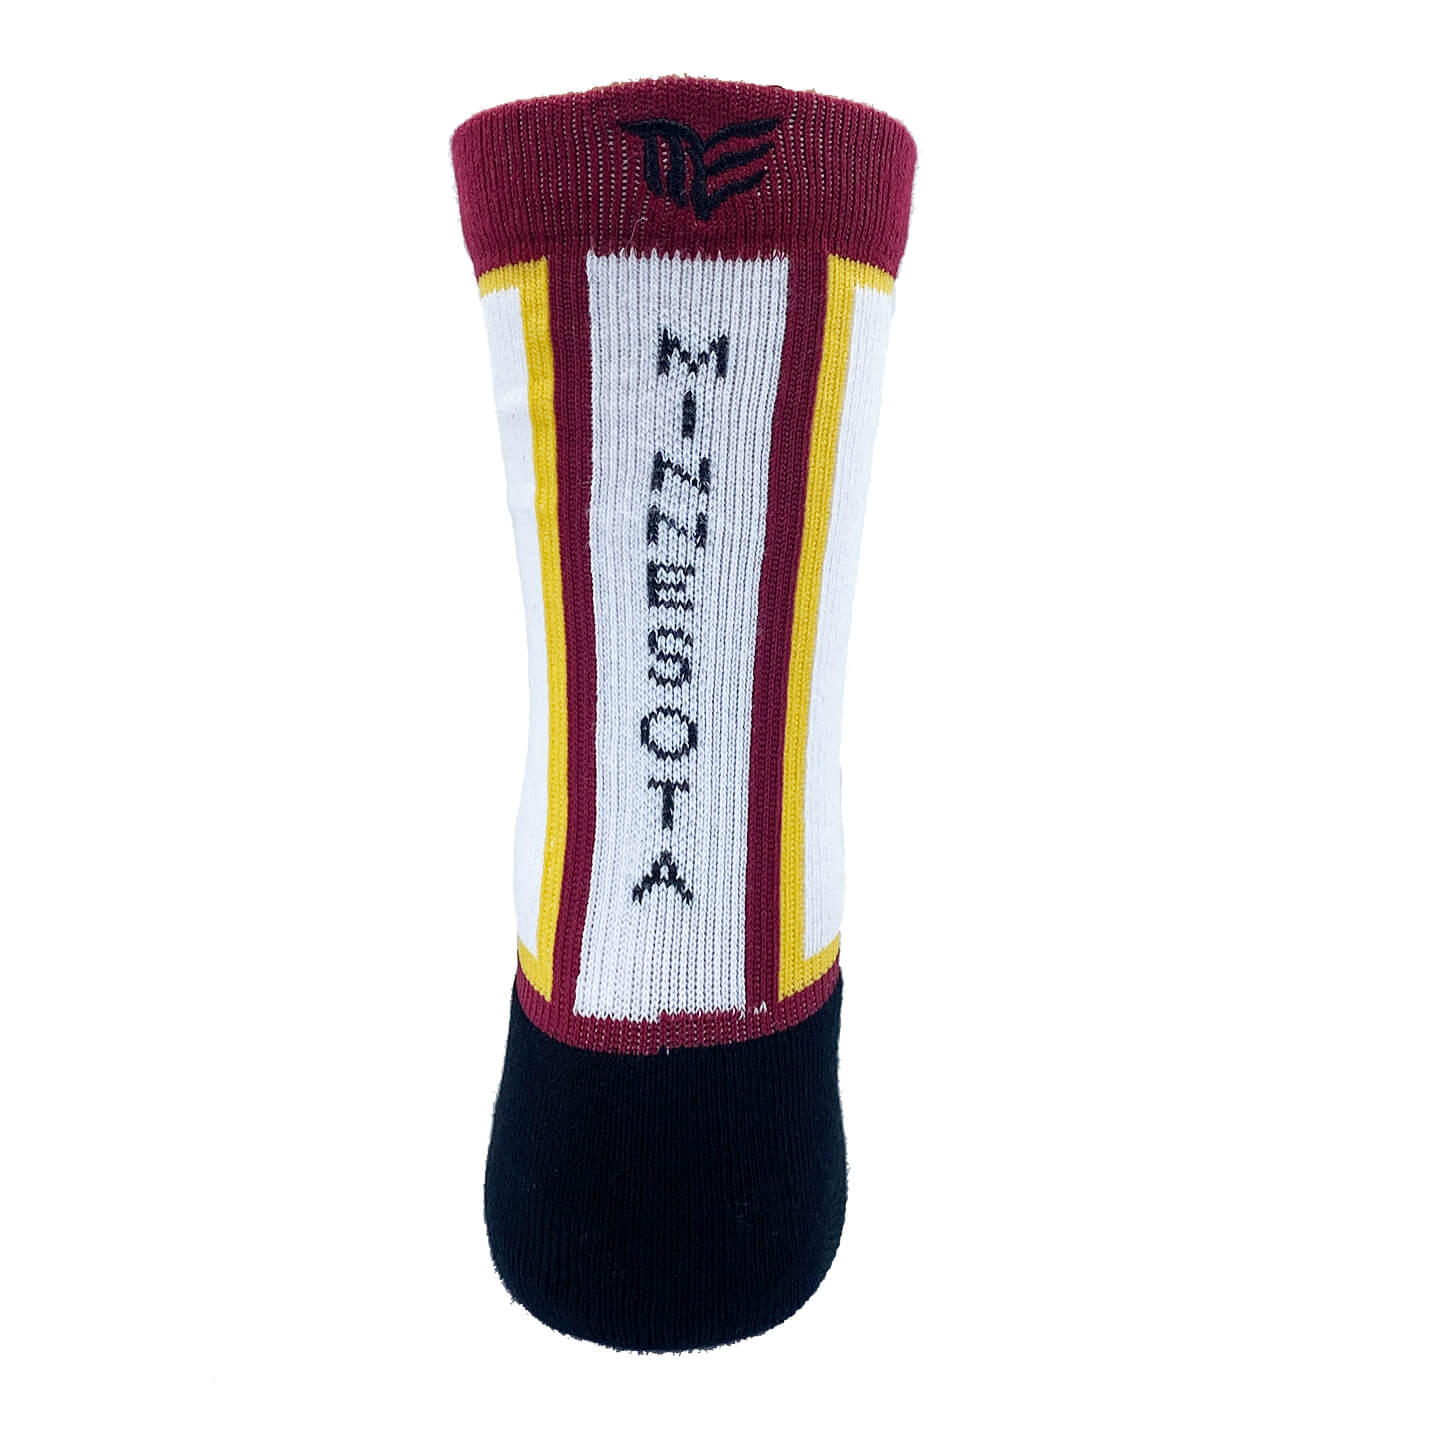 Minnesota crew socks in Maroon and Gold back view